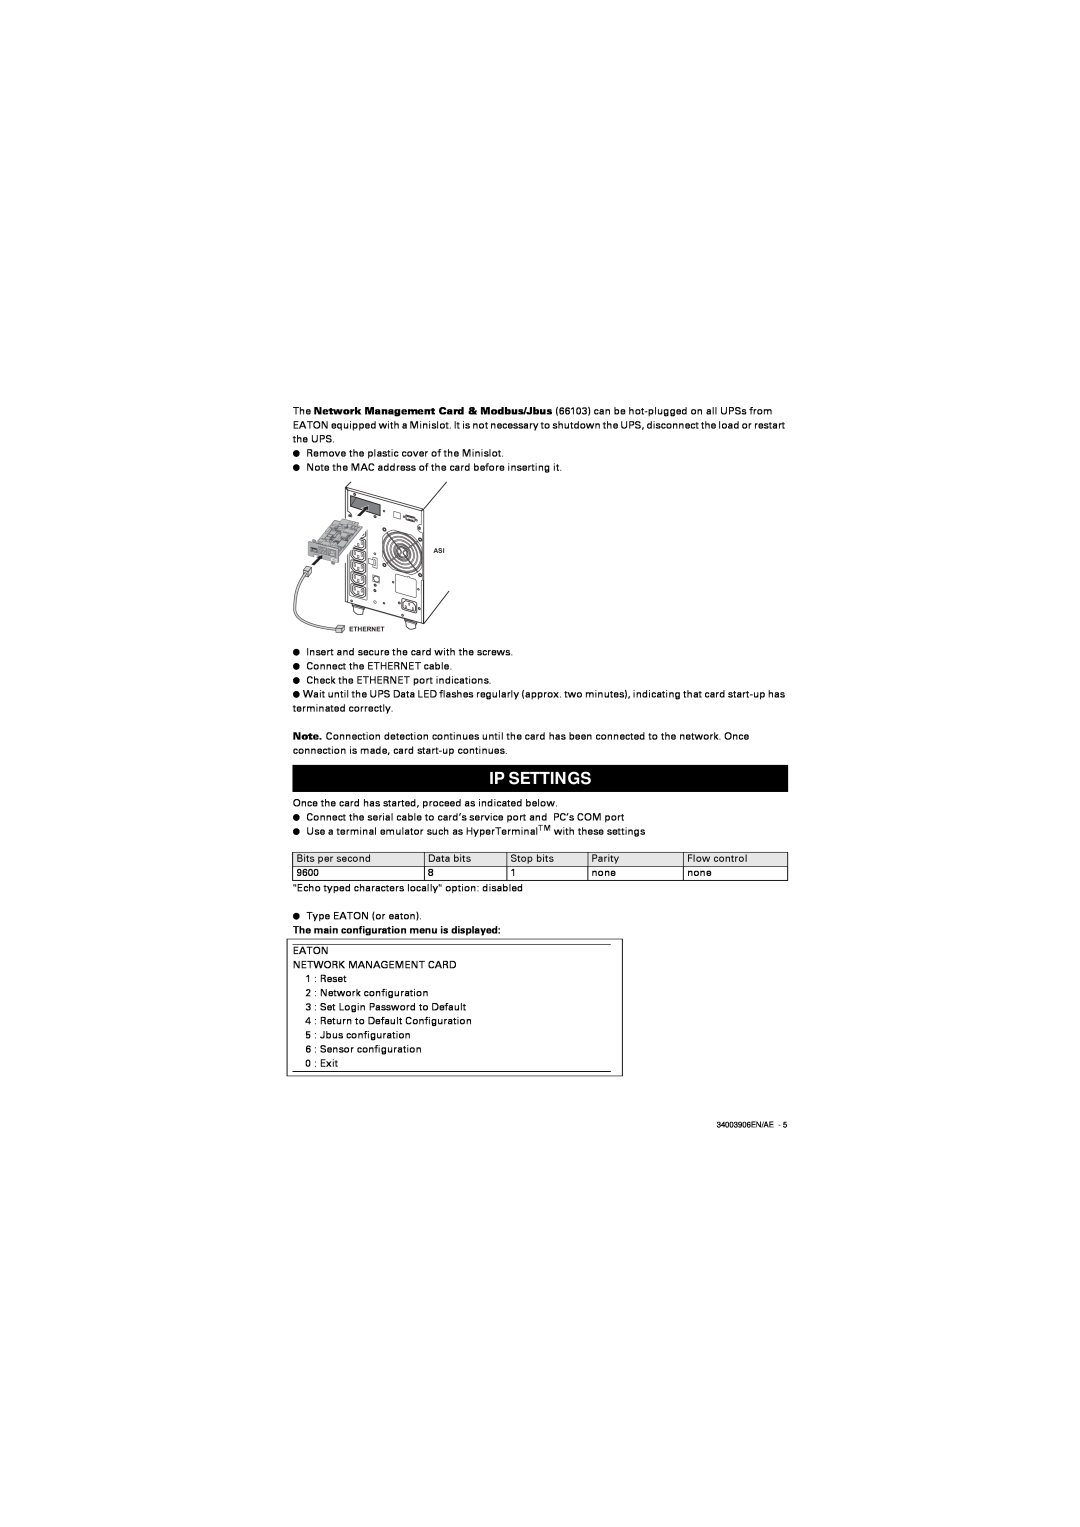 Eaton Electrical 66103 installation manual Ip Settings, The main configuration menu is displayed 